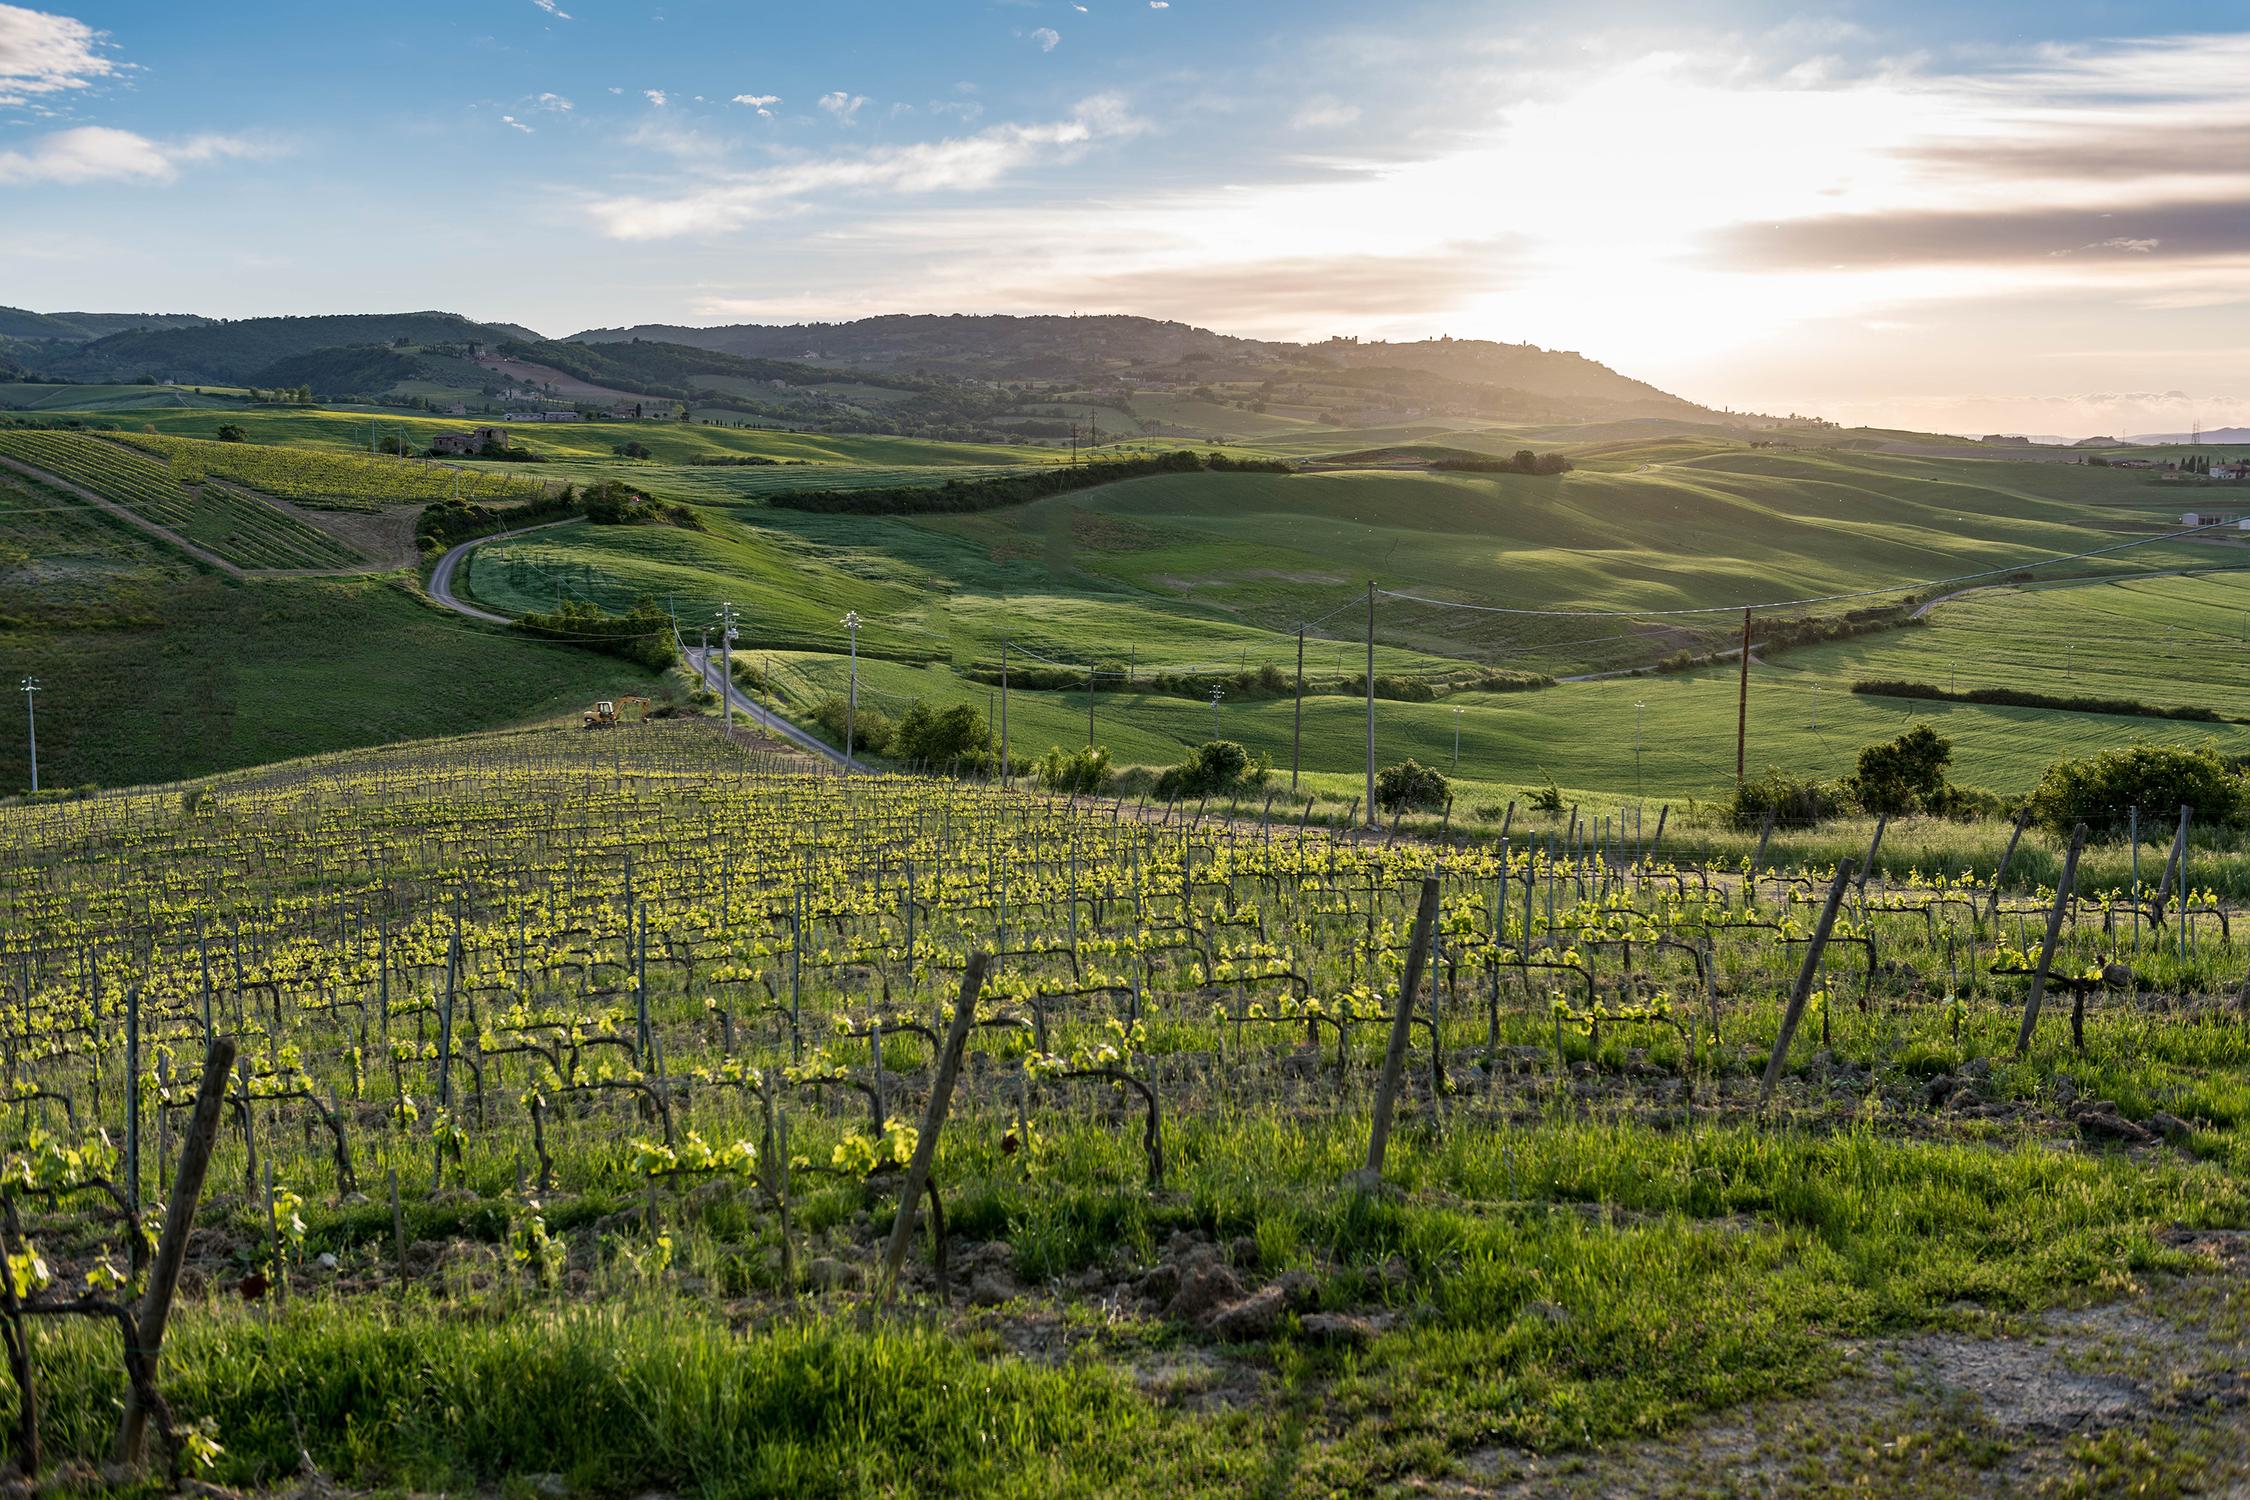 What to see in Tuscany and Umbria while staying at Casa Carlotta